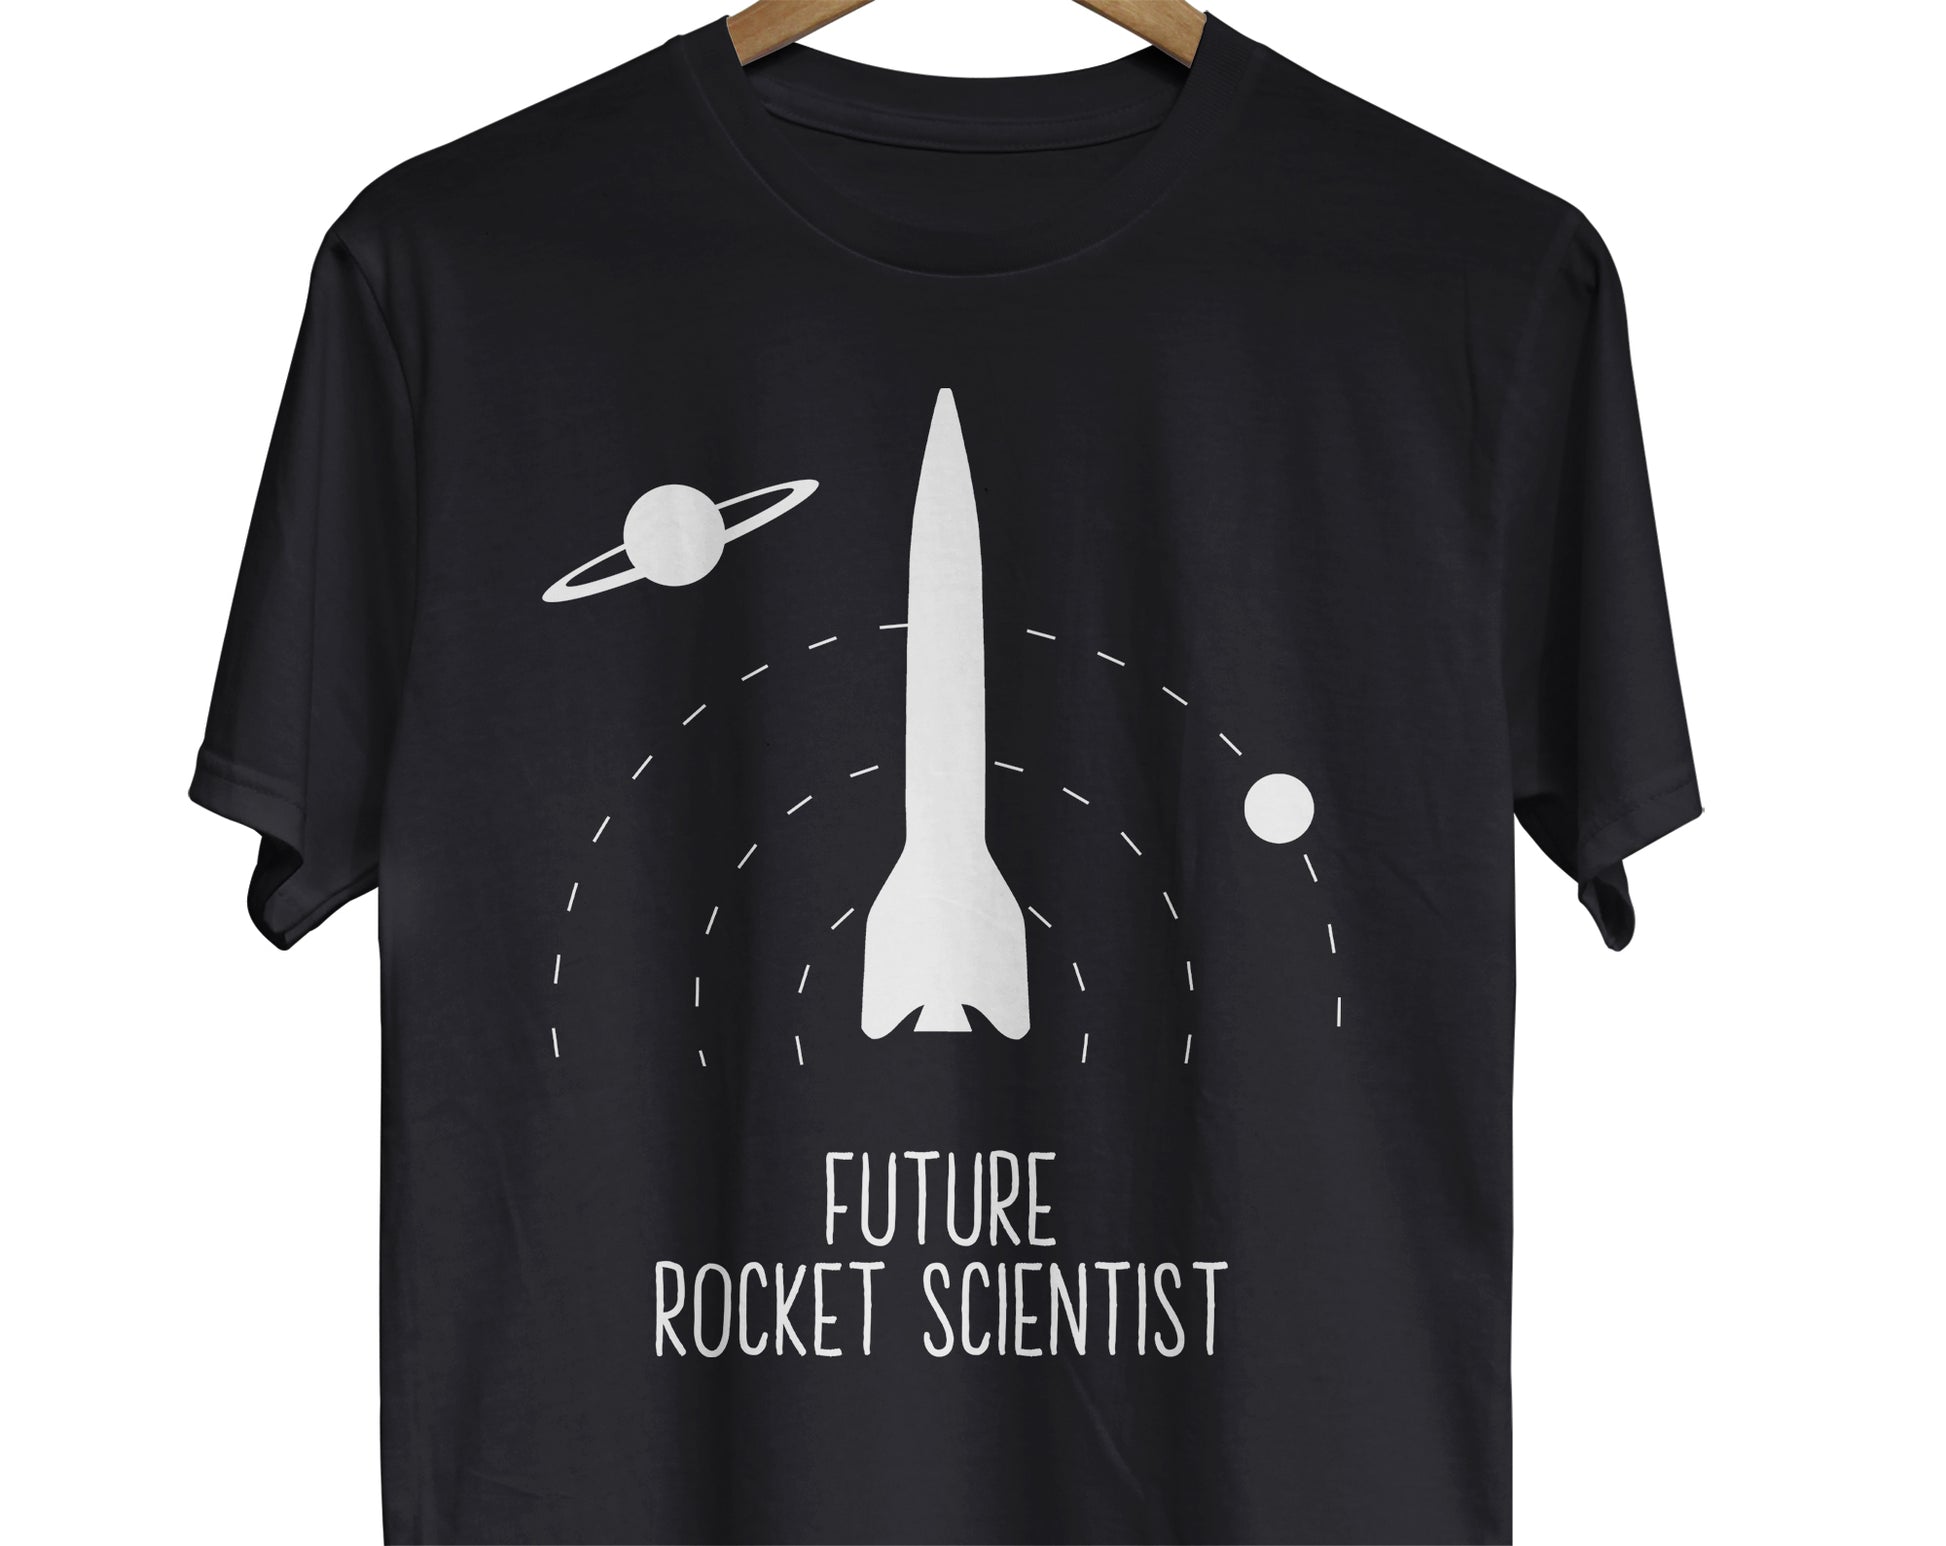 A science and engineering t-shirt featuring an image of a rocket shooting up into the sky and the text "Future Rocket Scientist".